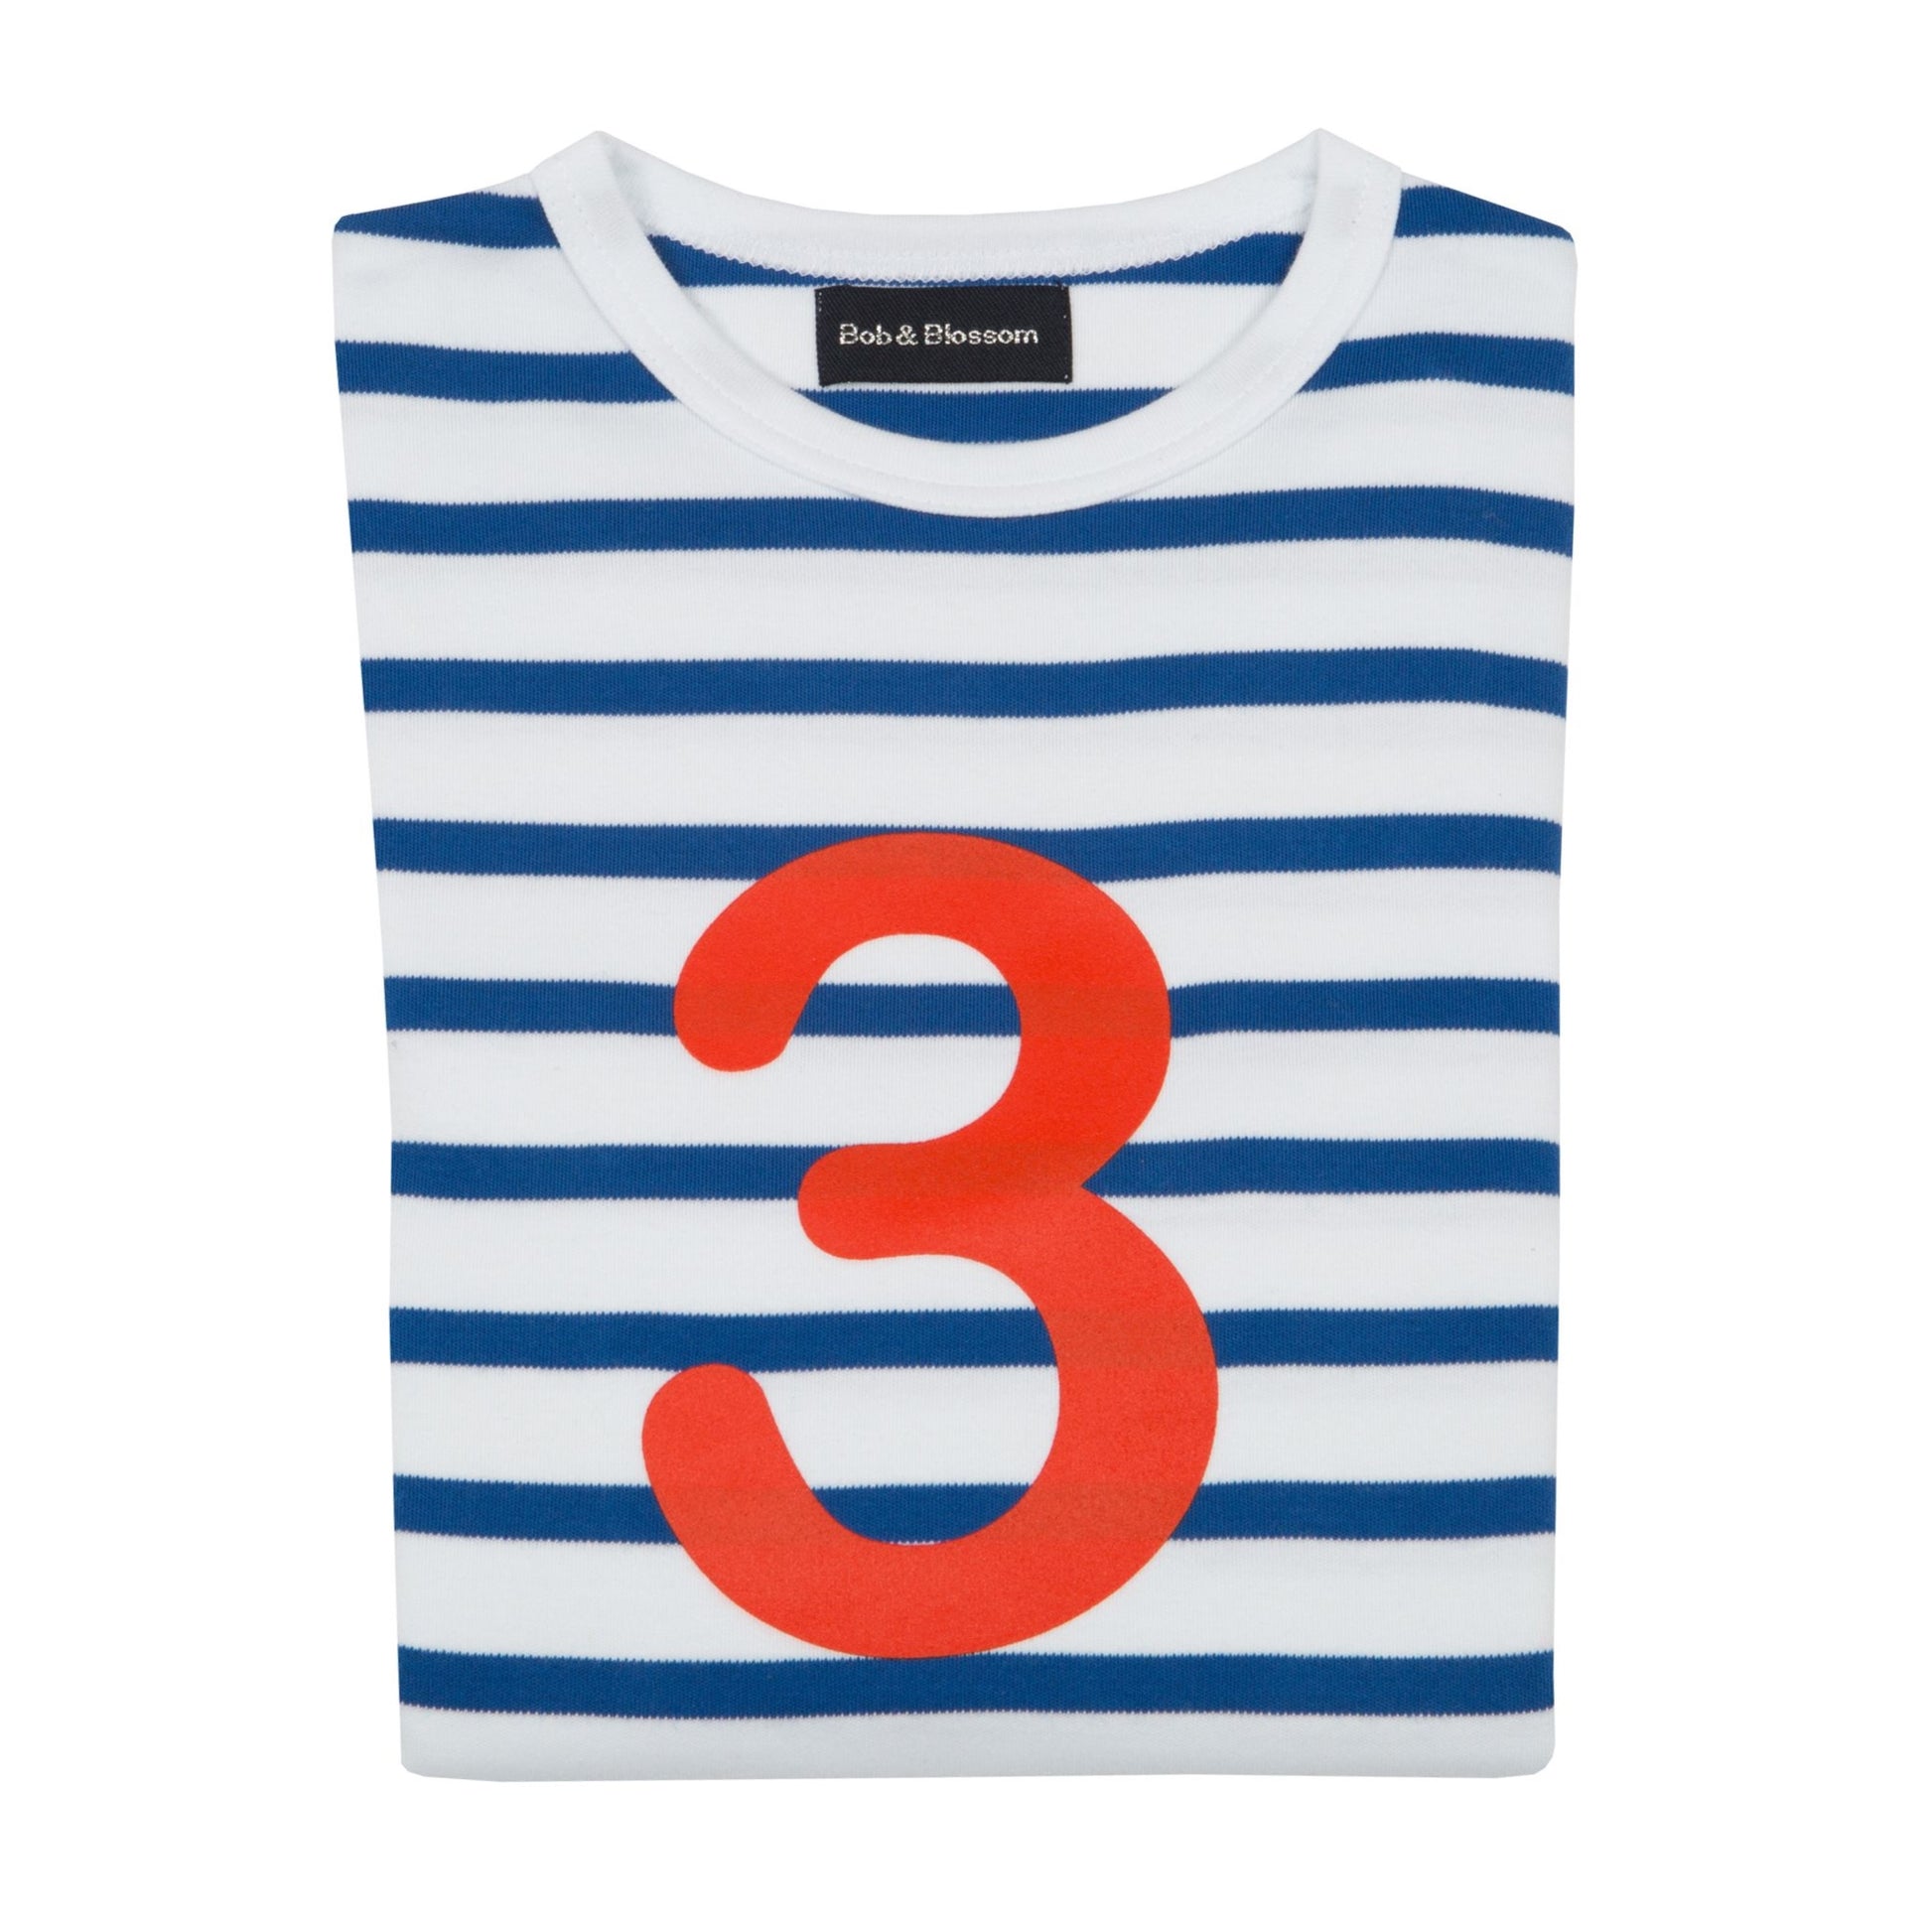 french blue and white striped t shirt with bright red number 3 on the front